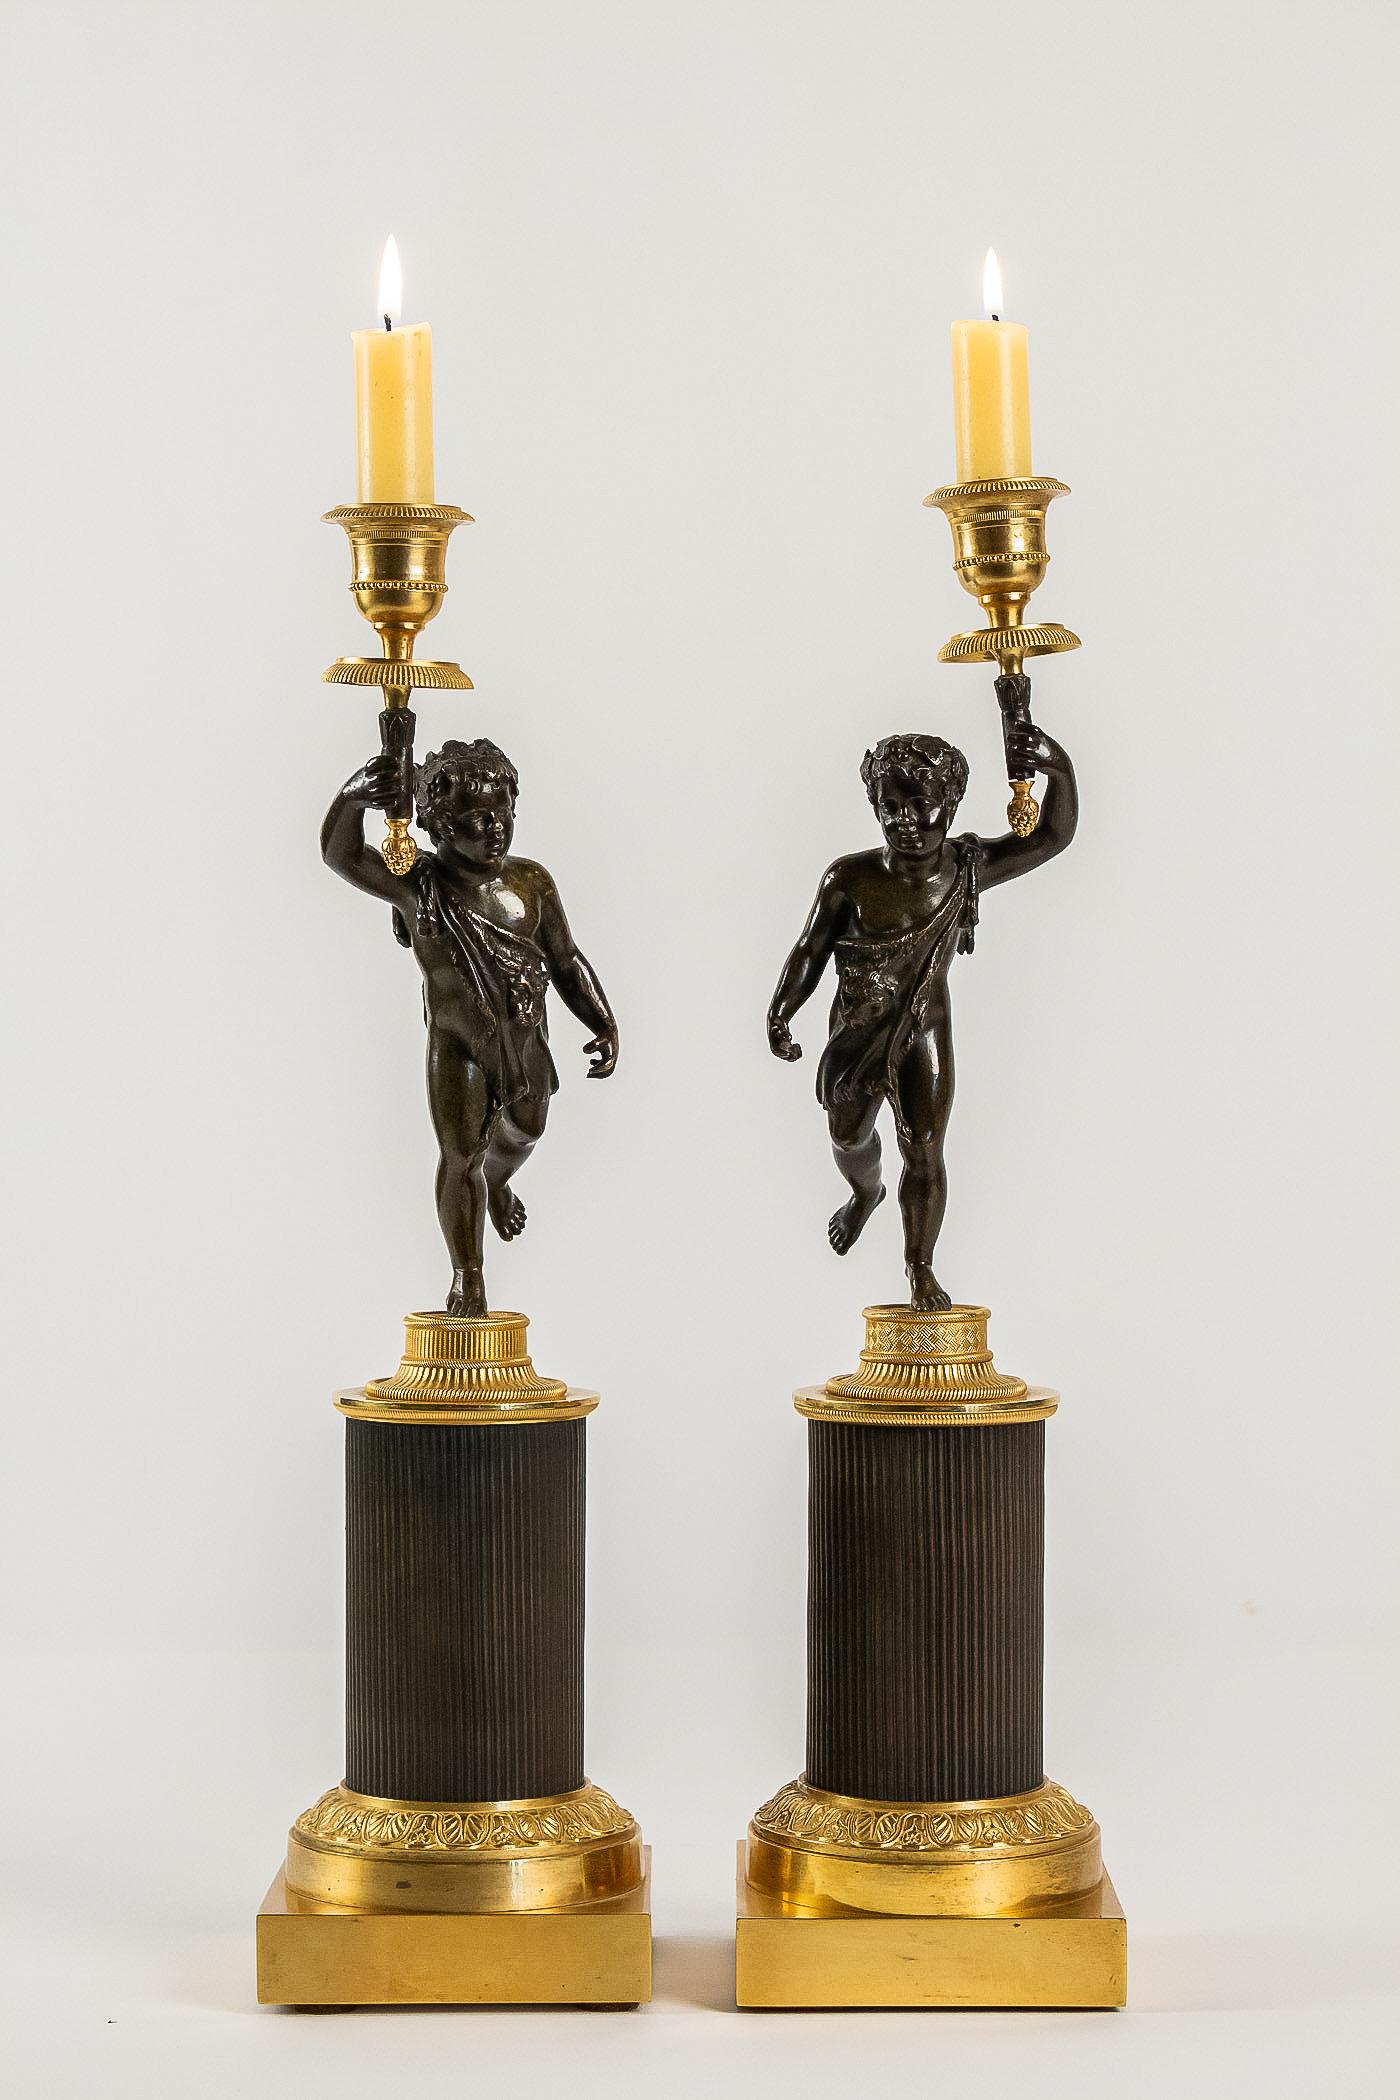 French Louis XVI style, pair of patinated and gilded candlesticks, circa 1880

A nicely elegant pair of finely chiseled mercury-gilt and patinated bronze candlesticks depicting antique Putti, resting on gilt and patinated bronze